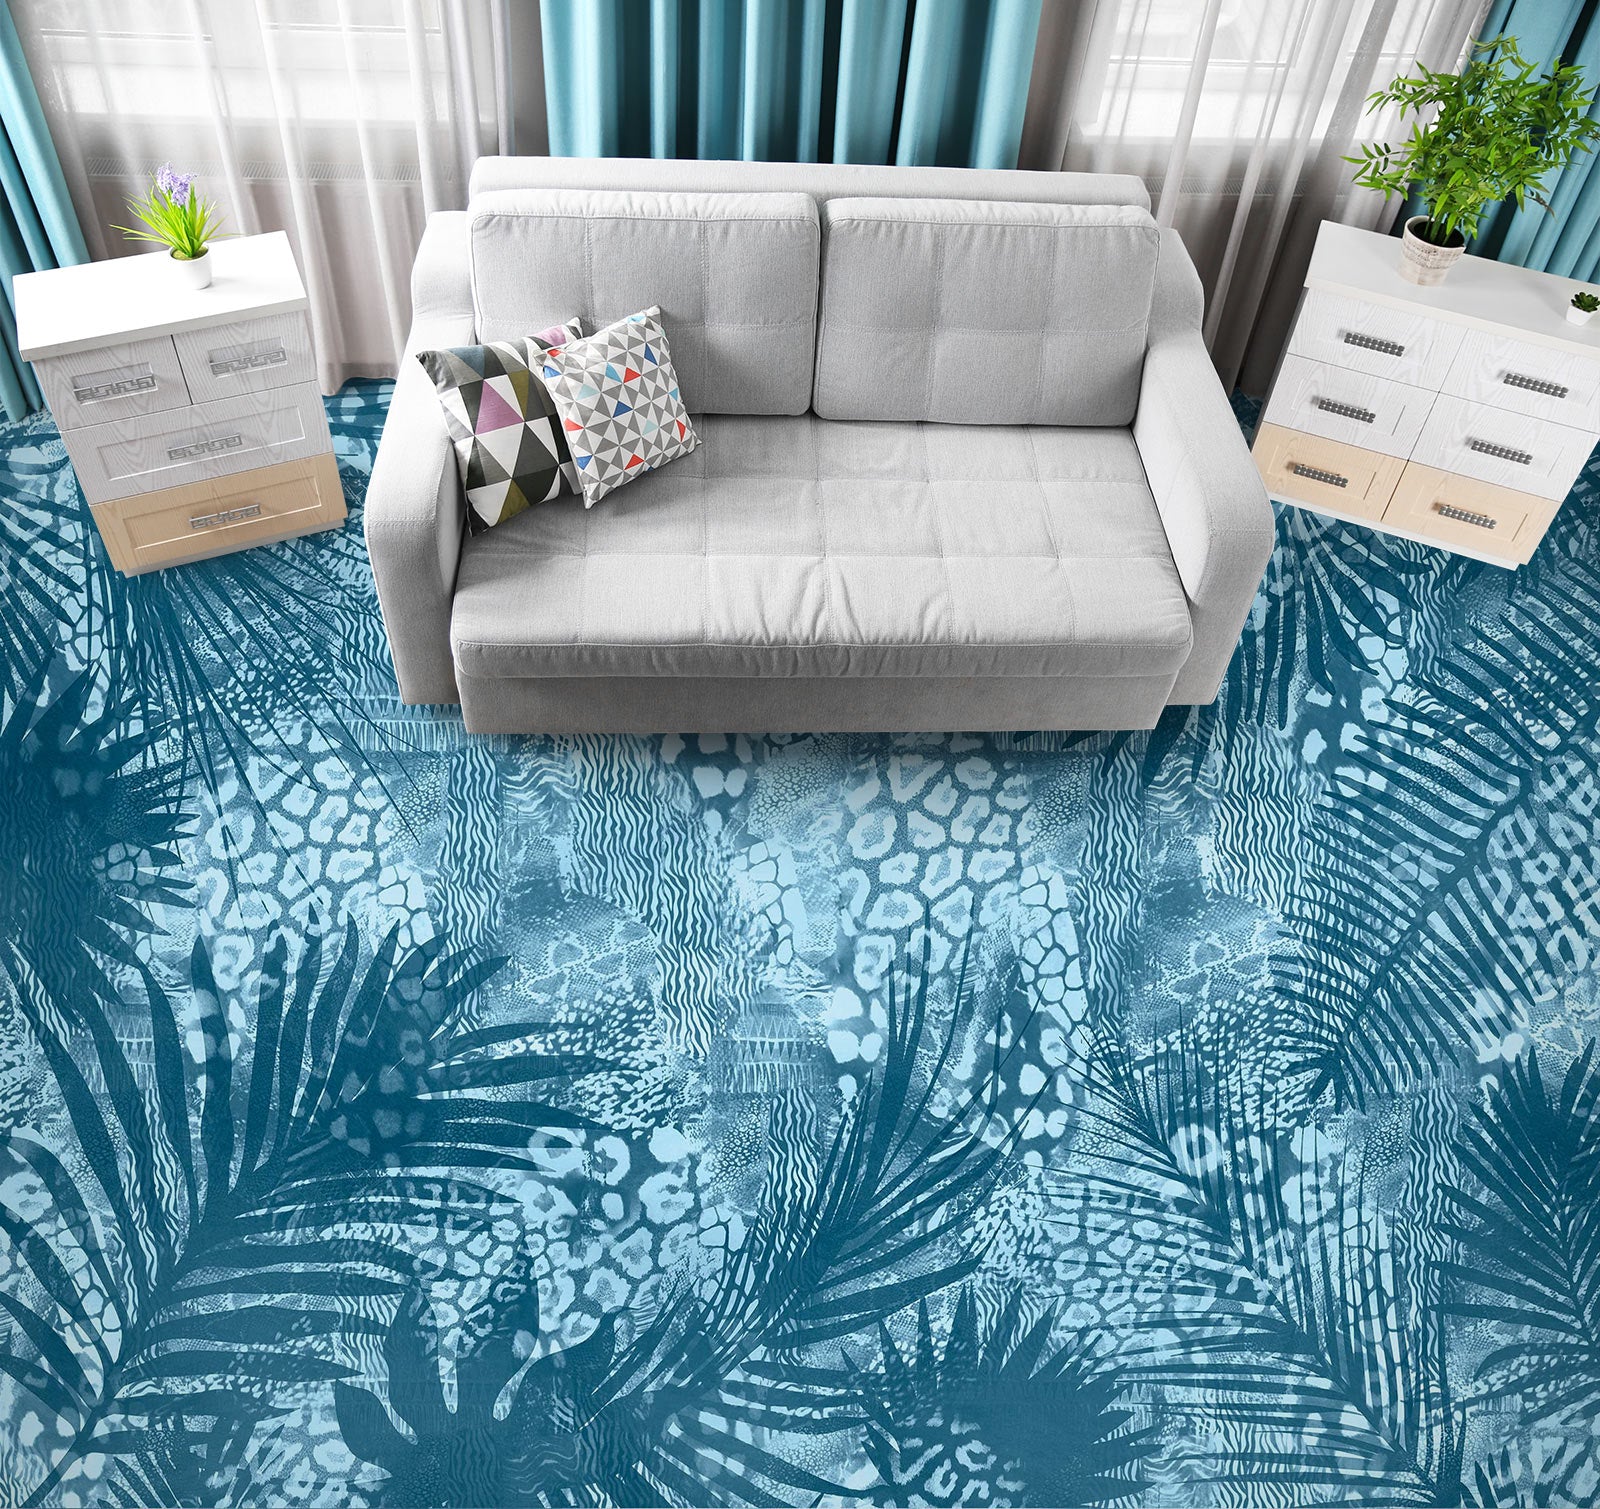 3D Blue Leaves Pattern 102118 Andrea Haase Floor Mural  Wallpaper Murals Self-Adhesive Removable Print Epoxy